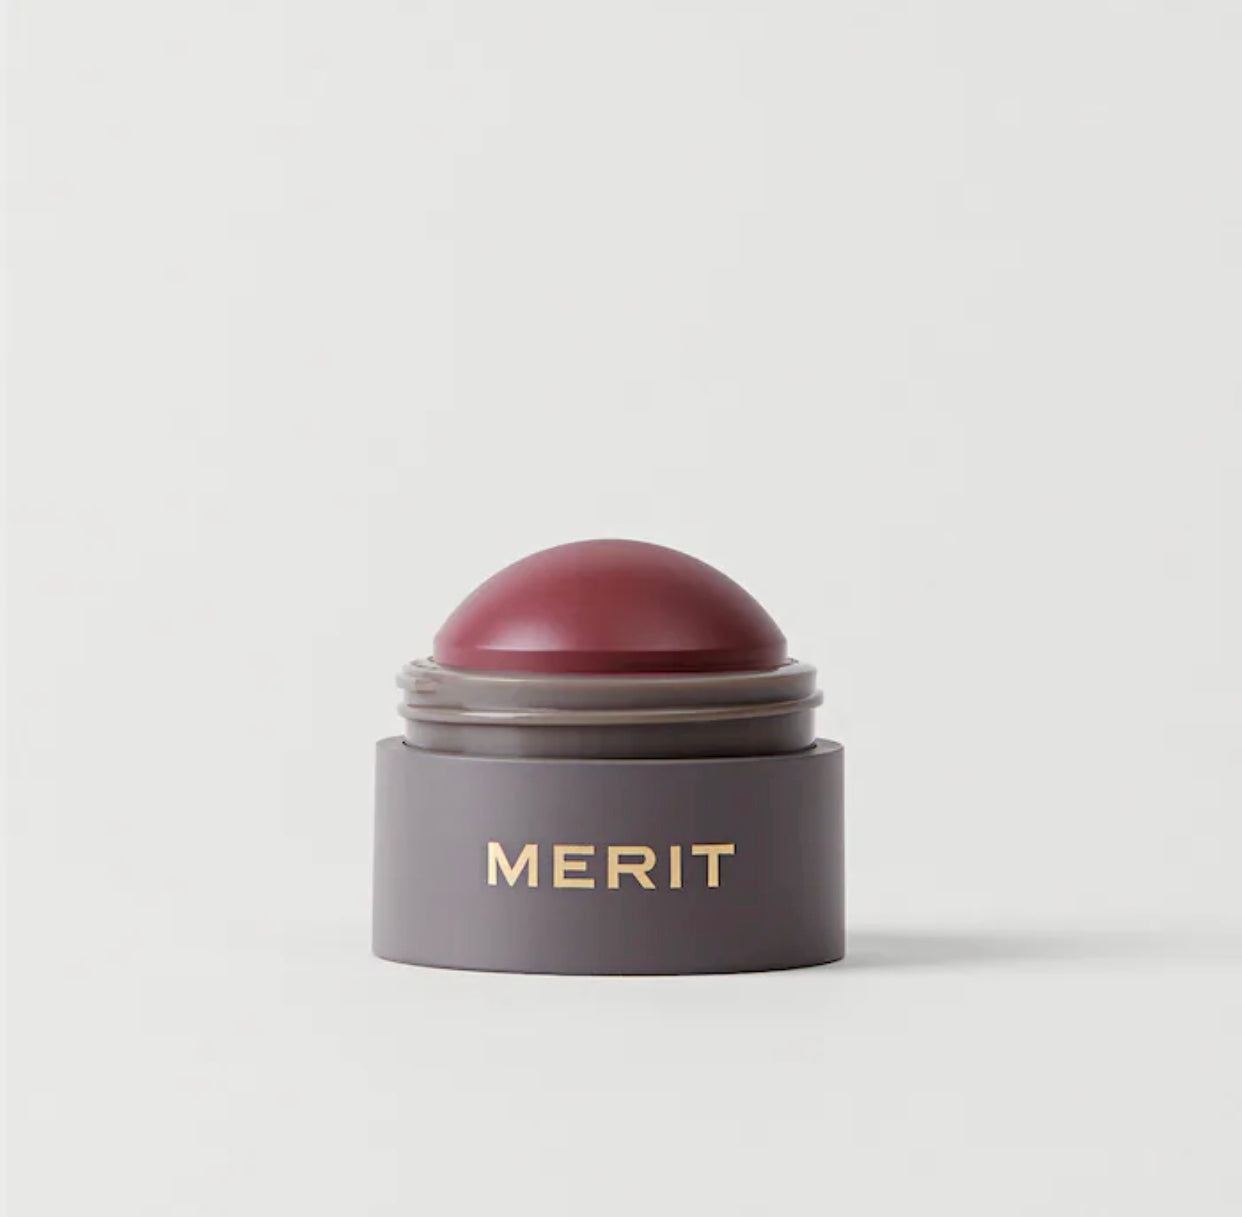 MERIT, THE HOLIDAY ESSENTIALS FACE SET